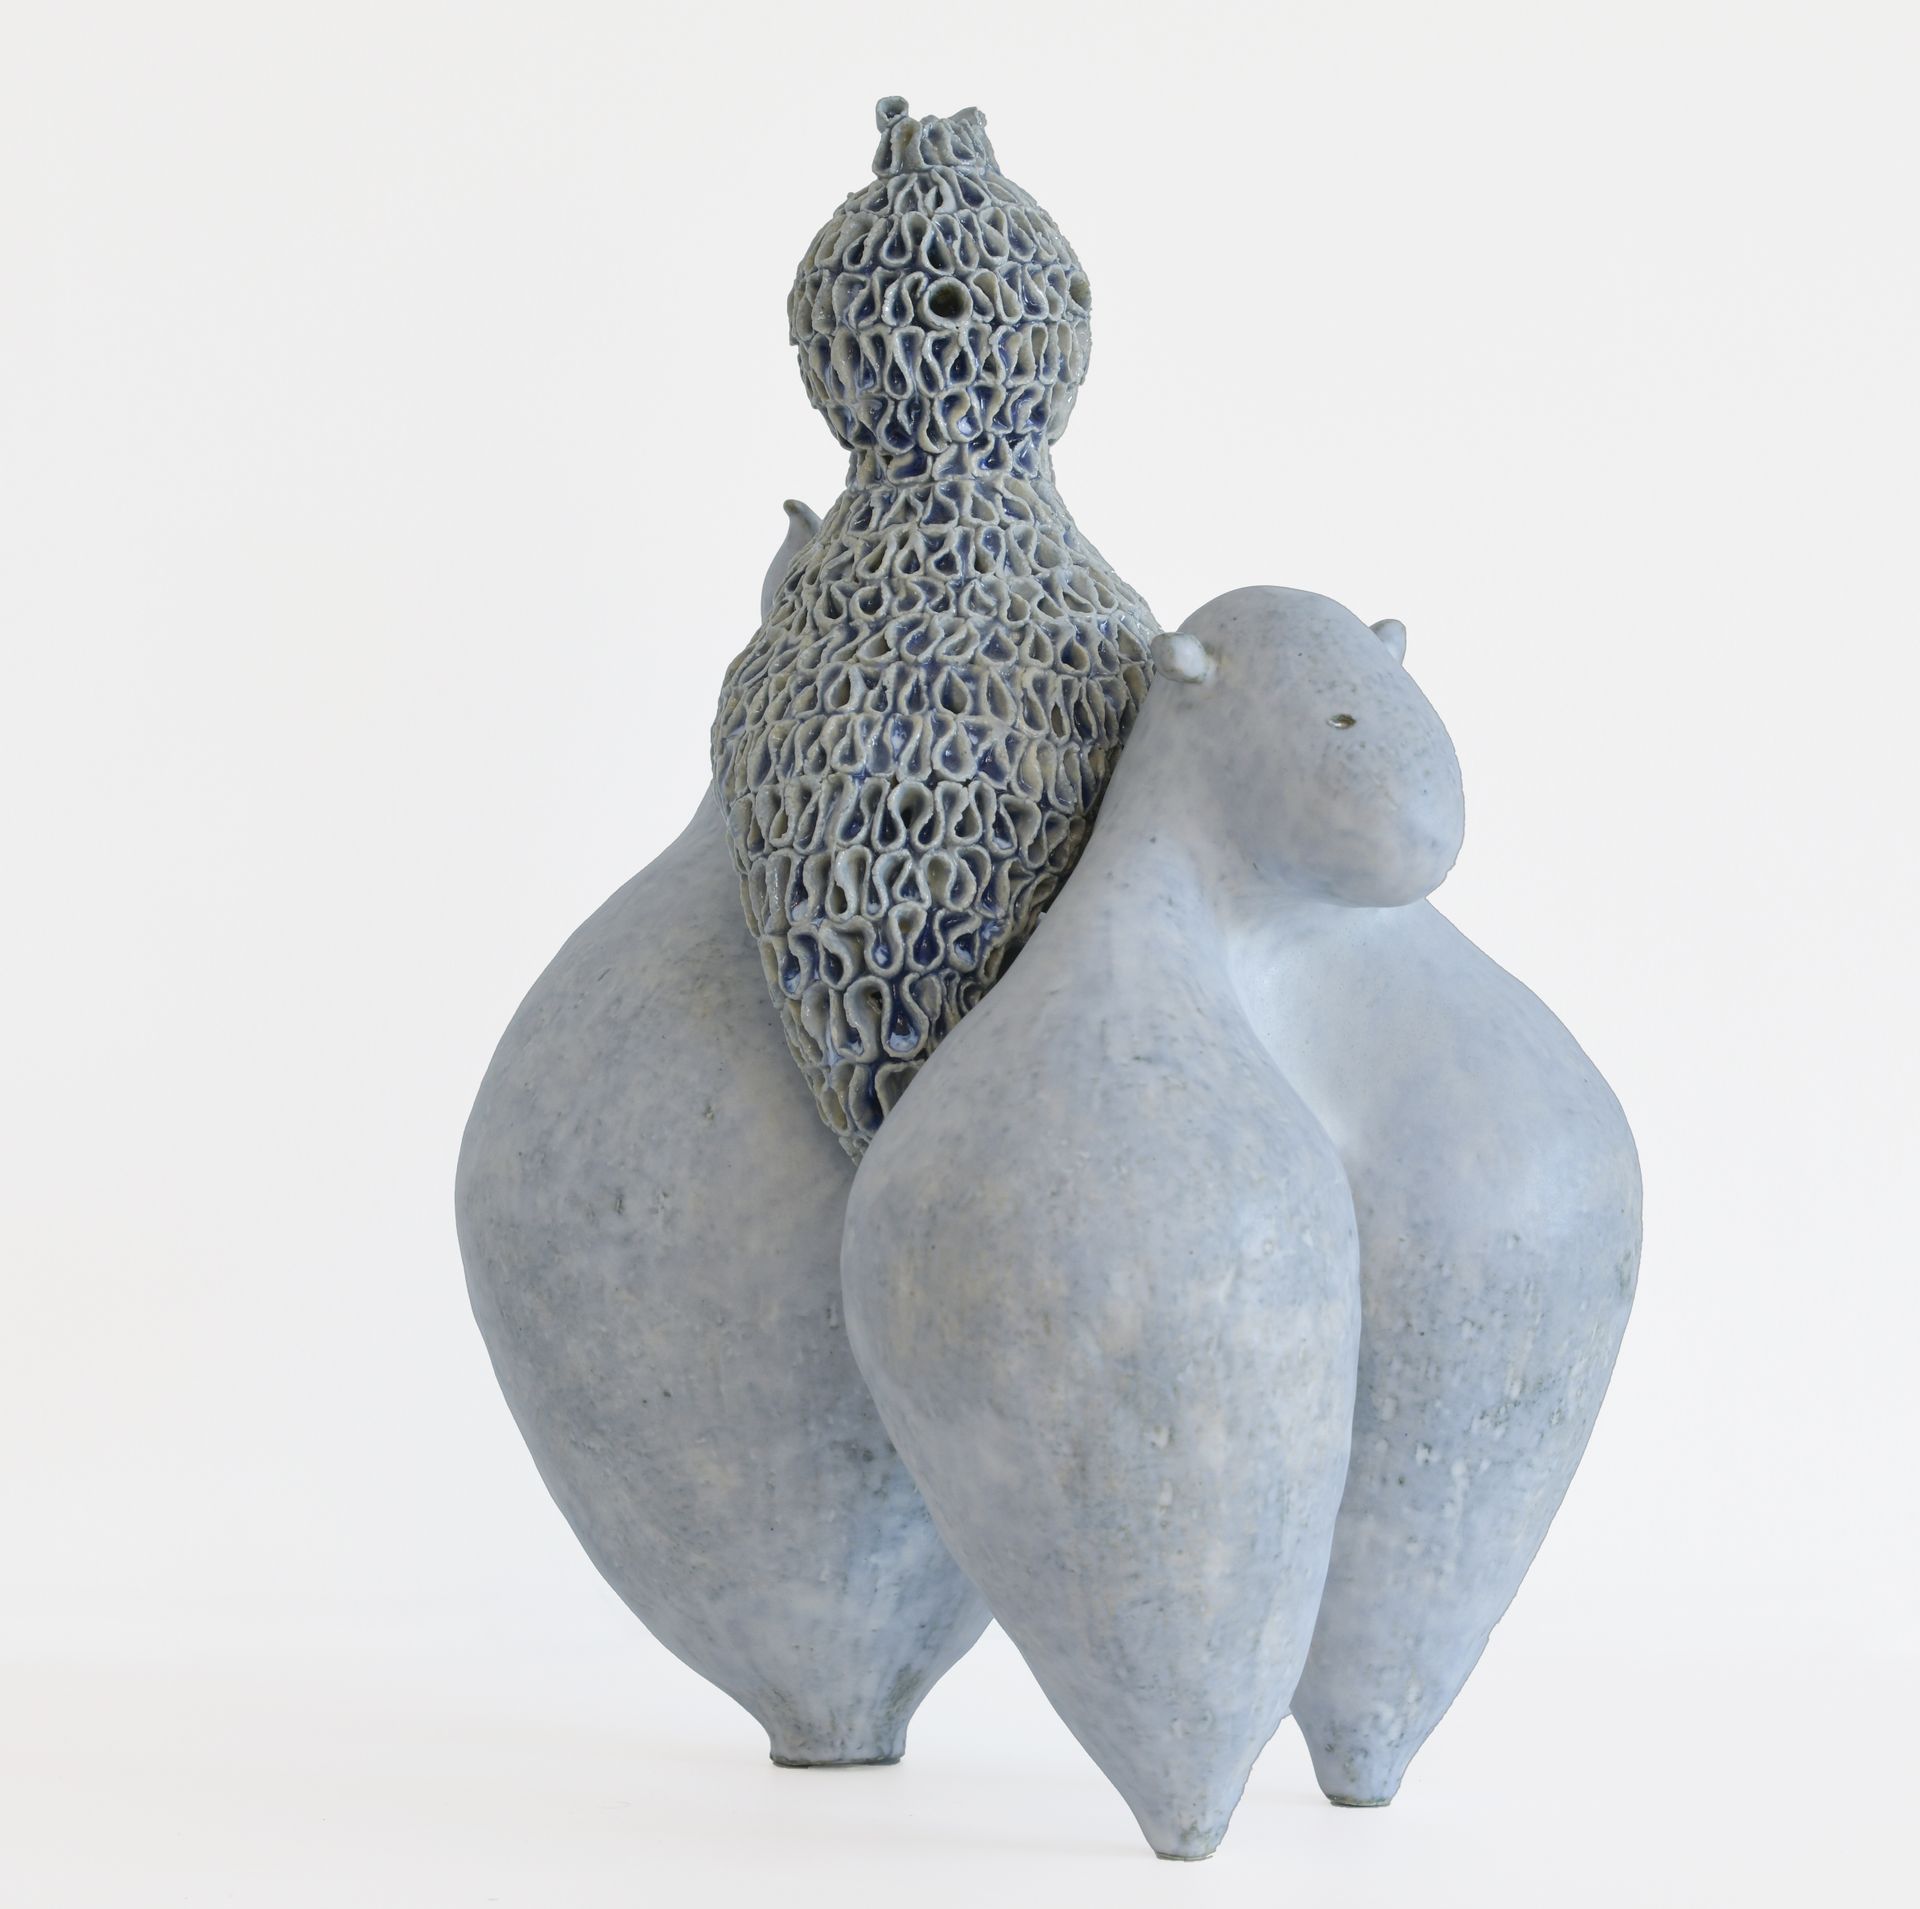 Ceramic sculpture by Japanese artist Teruri Yamawaki. The work is composed of two parts: a figure seated on a stylized horse. The diversity of human personalities and emotions is reflected in her creations. She considers her work to be a living entity, or even a talisman capable of bringing peace to those who view it.